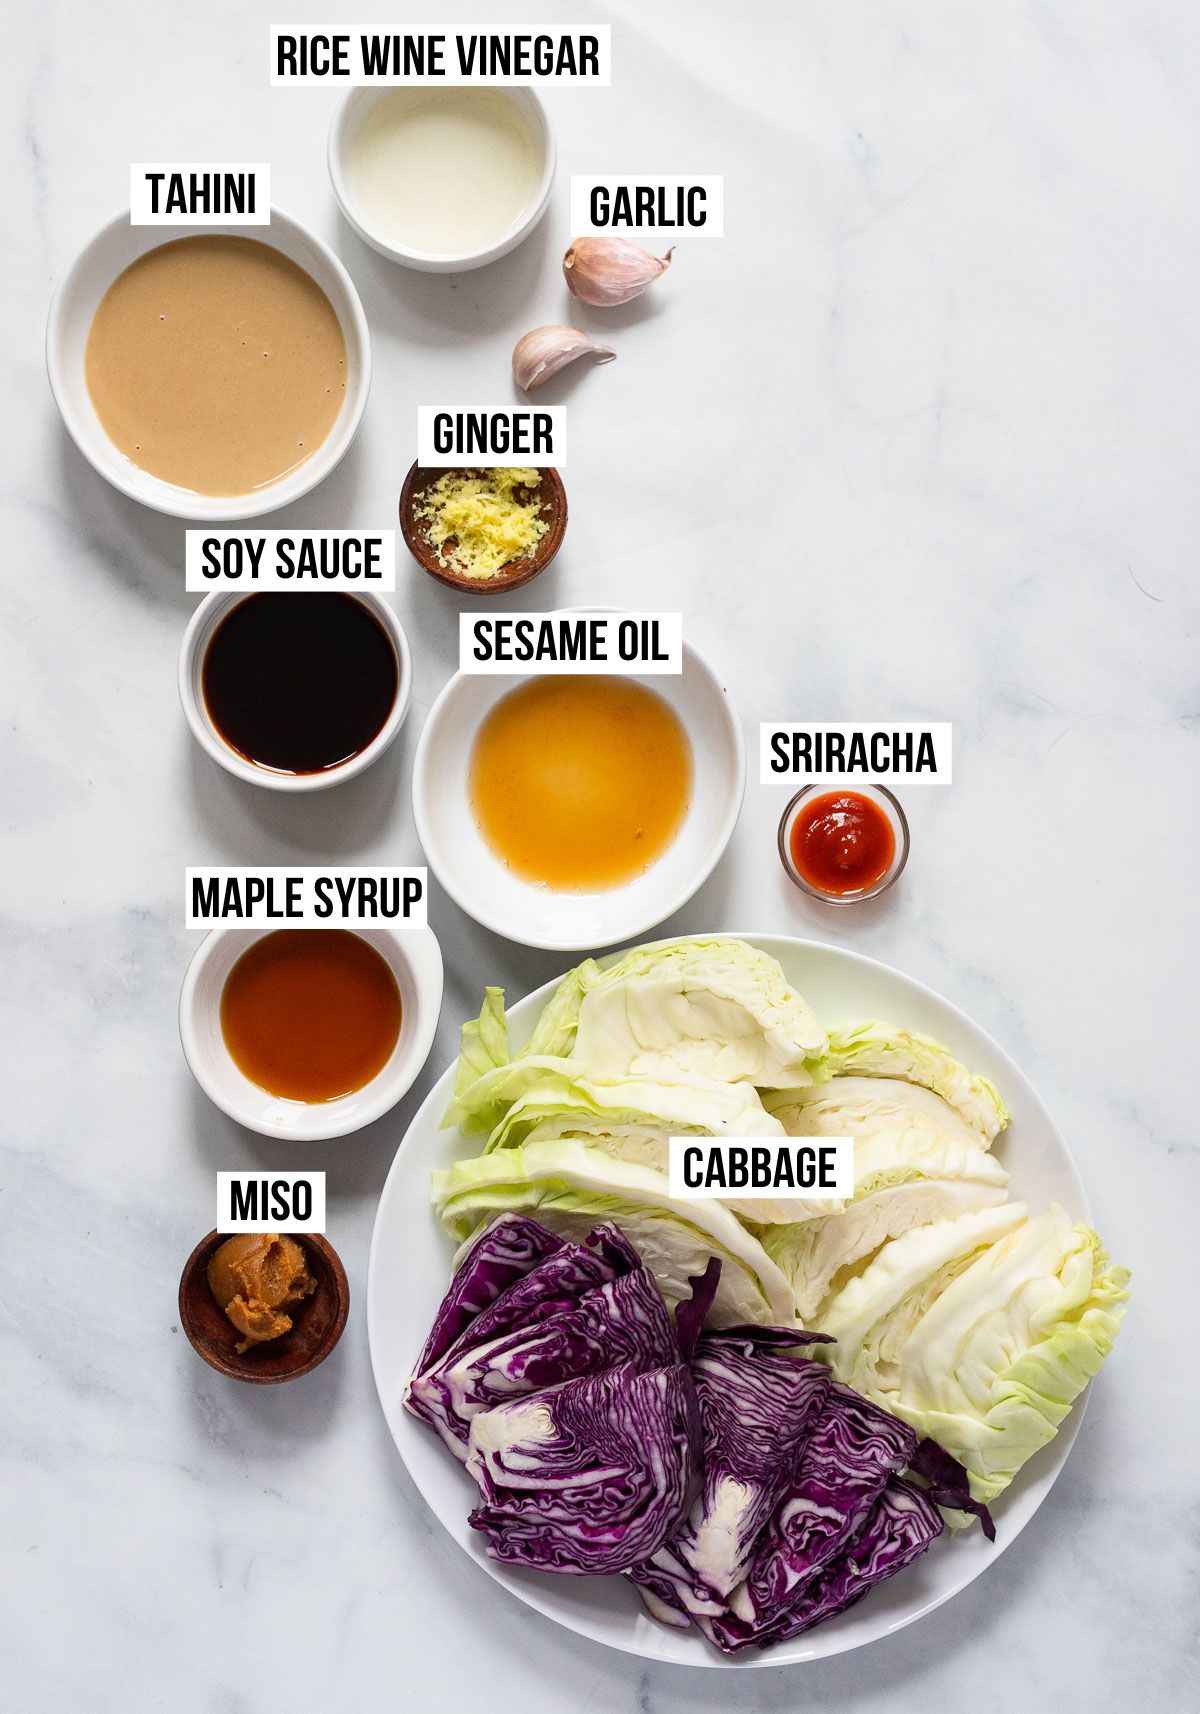 roasted cabbage and tahini sauce ingredients in small dishes